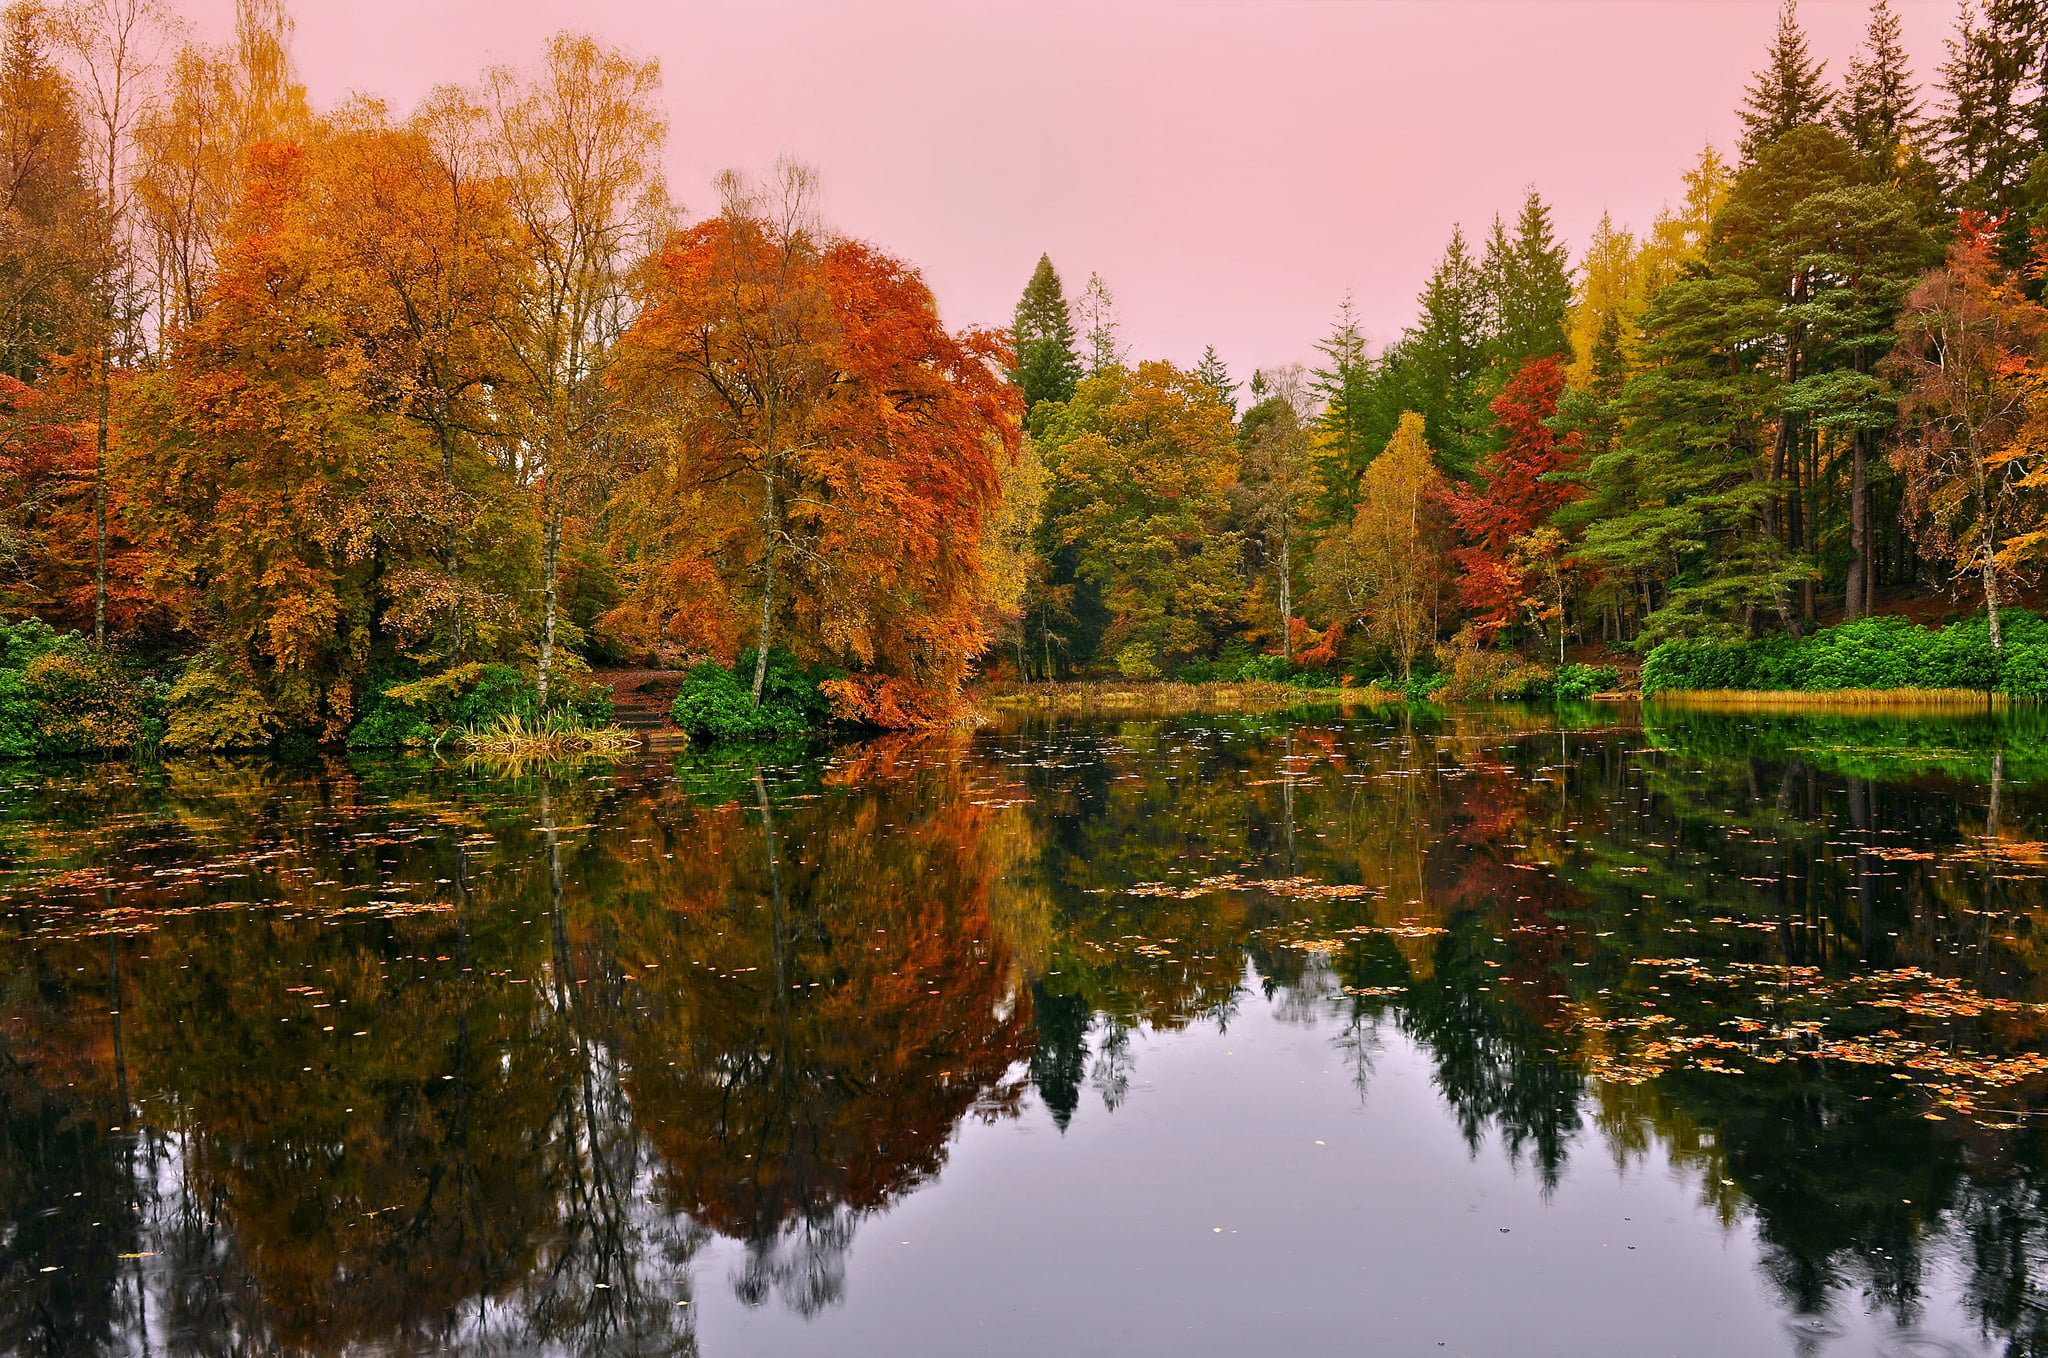 orange, yellow, and green leafed trees across body of water